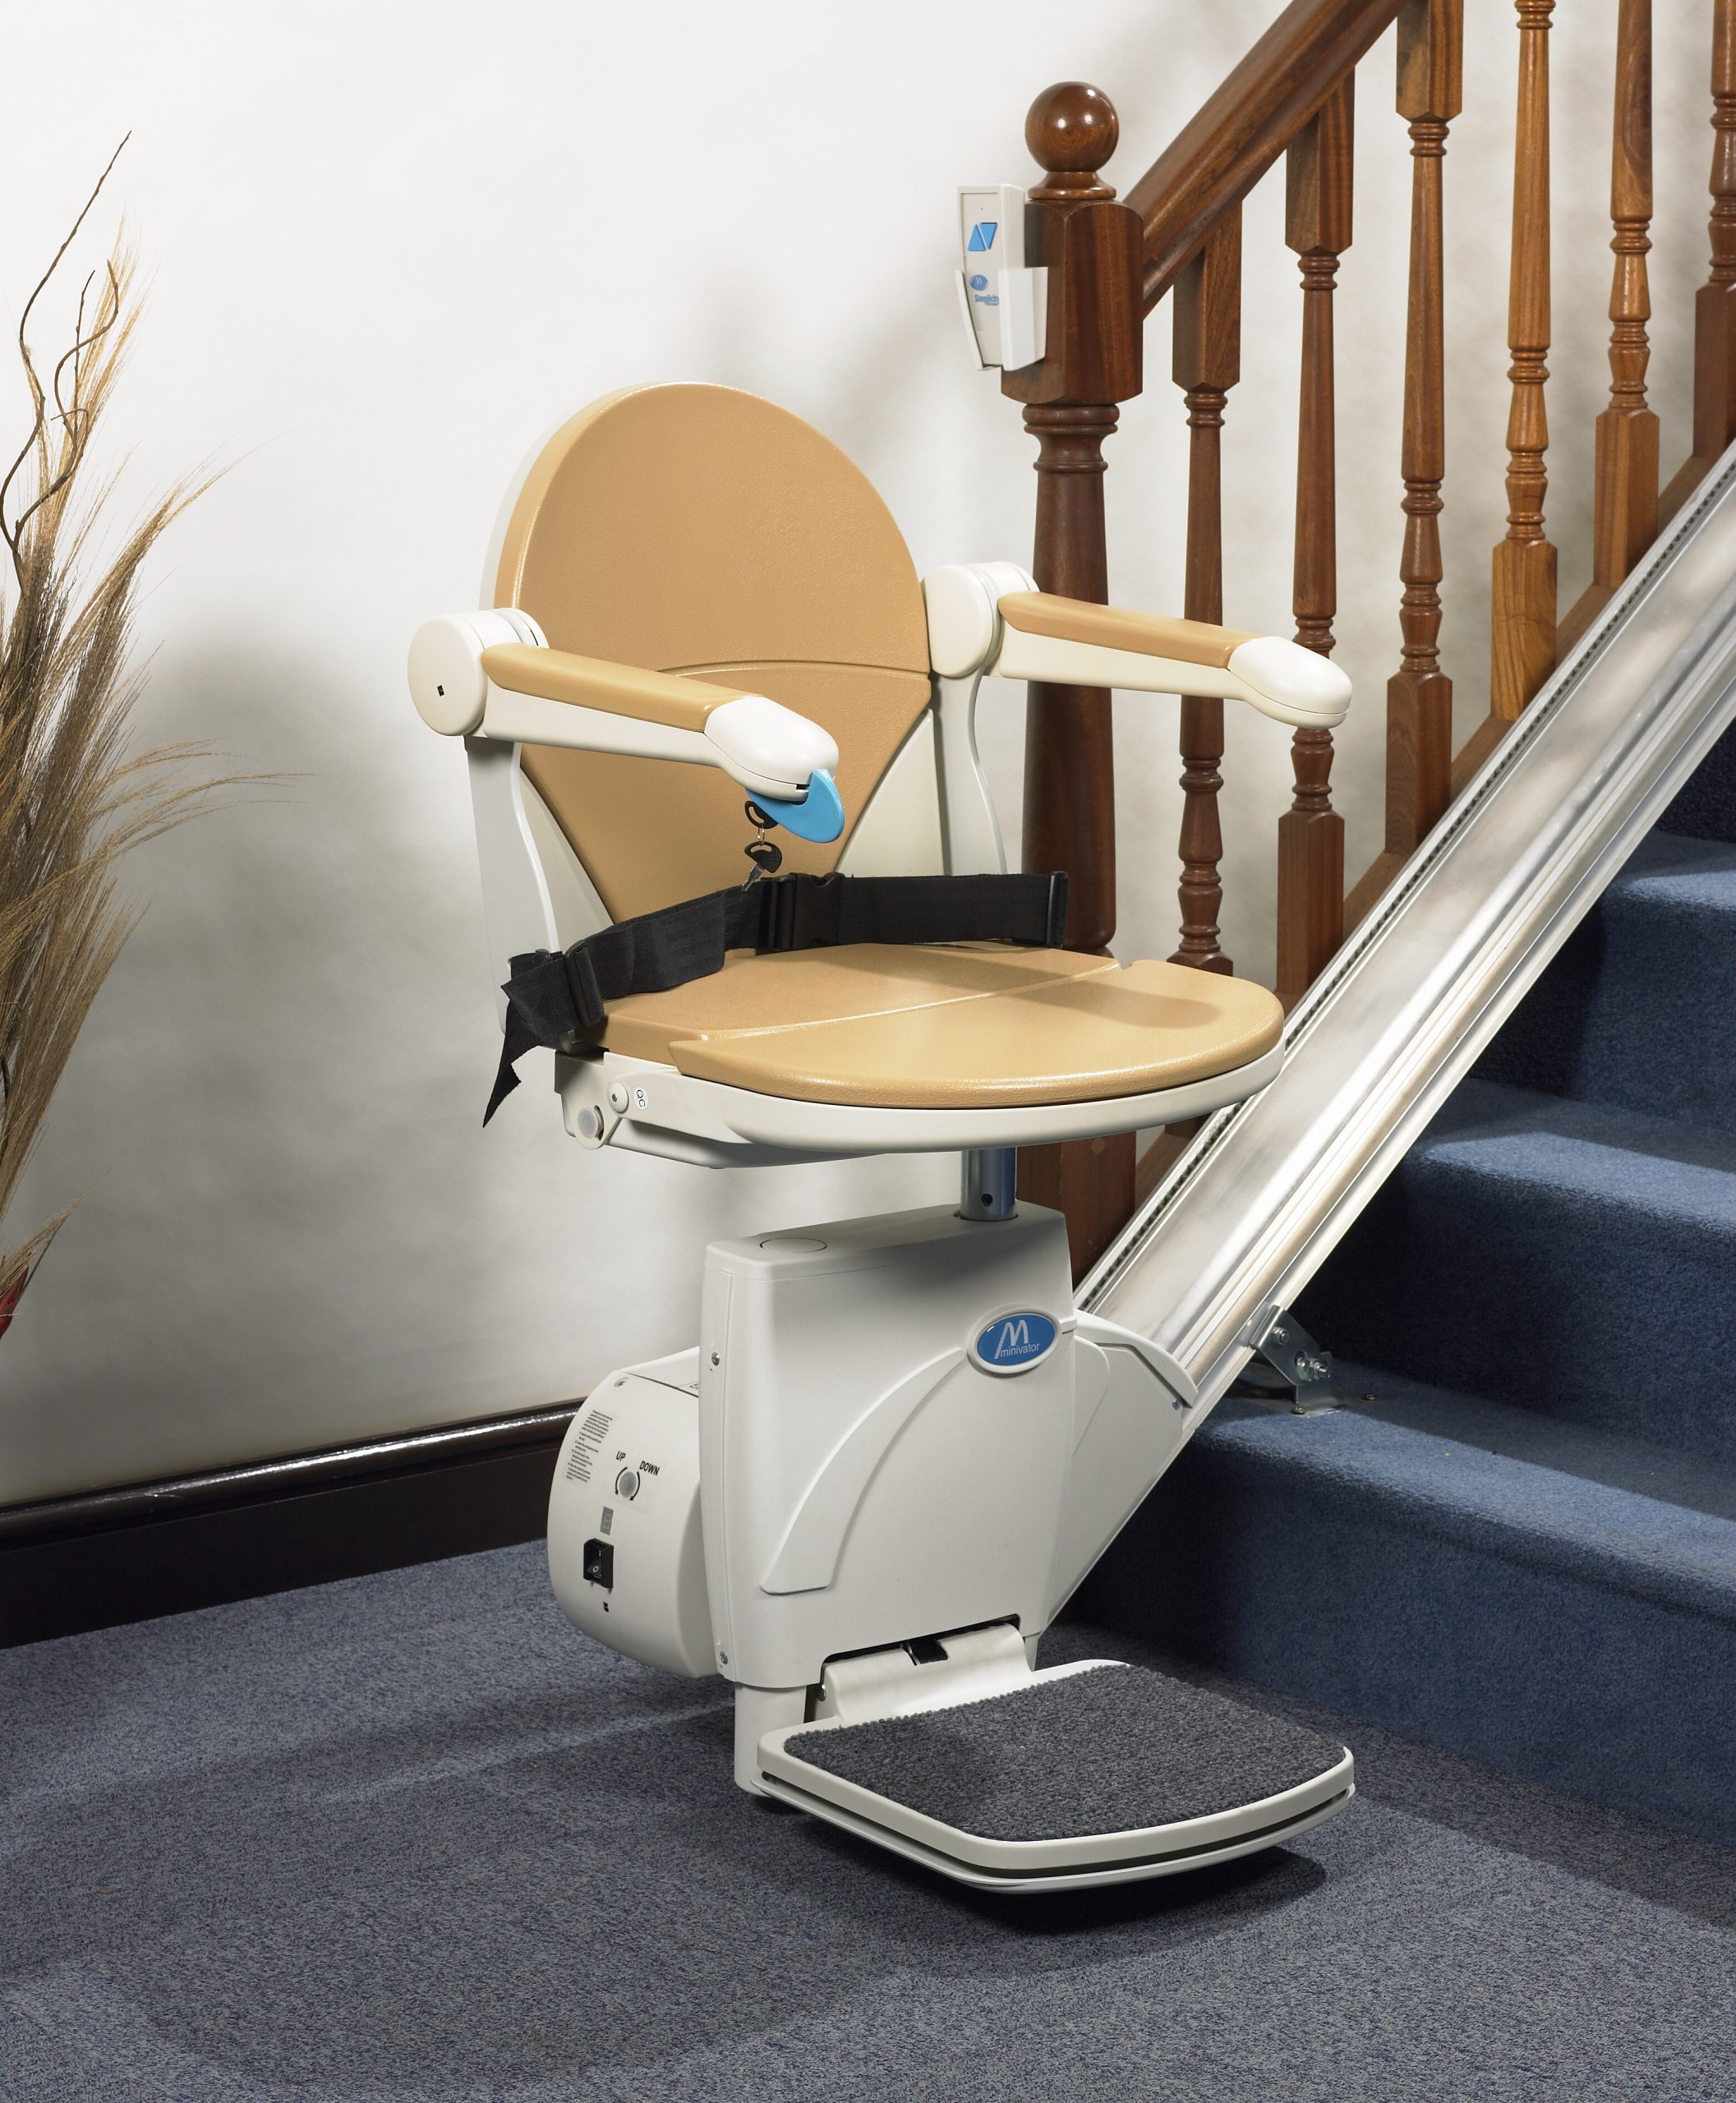 Stair Lifts Quotes and Installation in Los Angeles